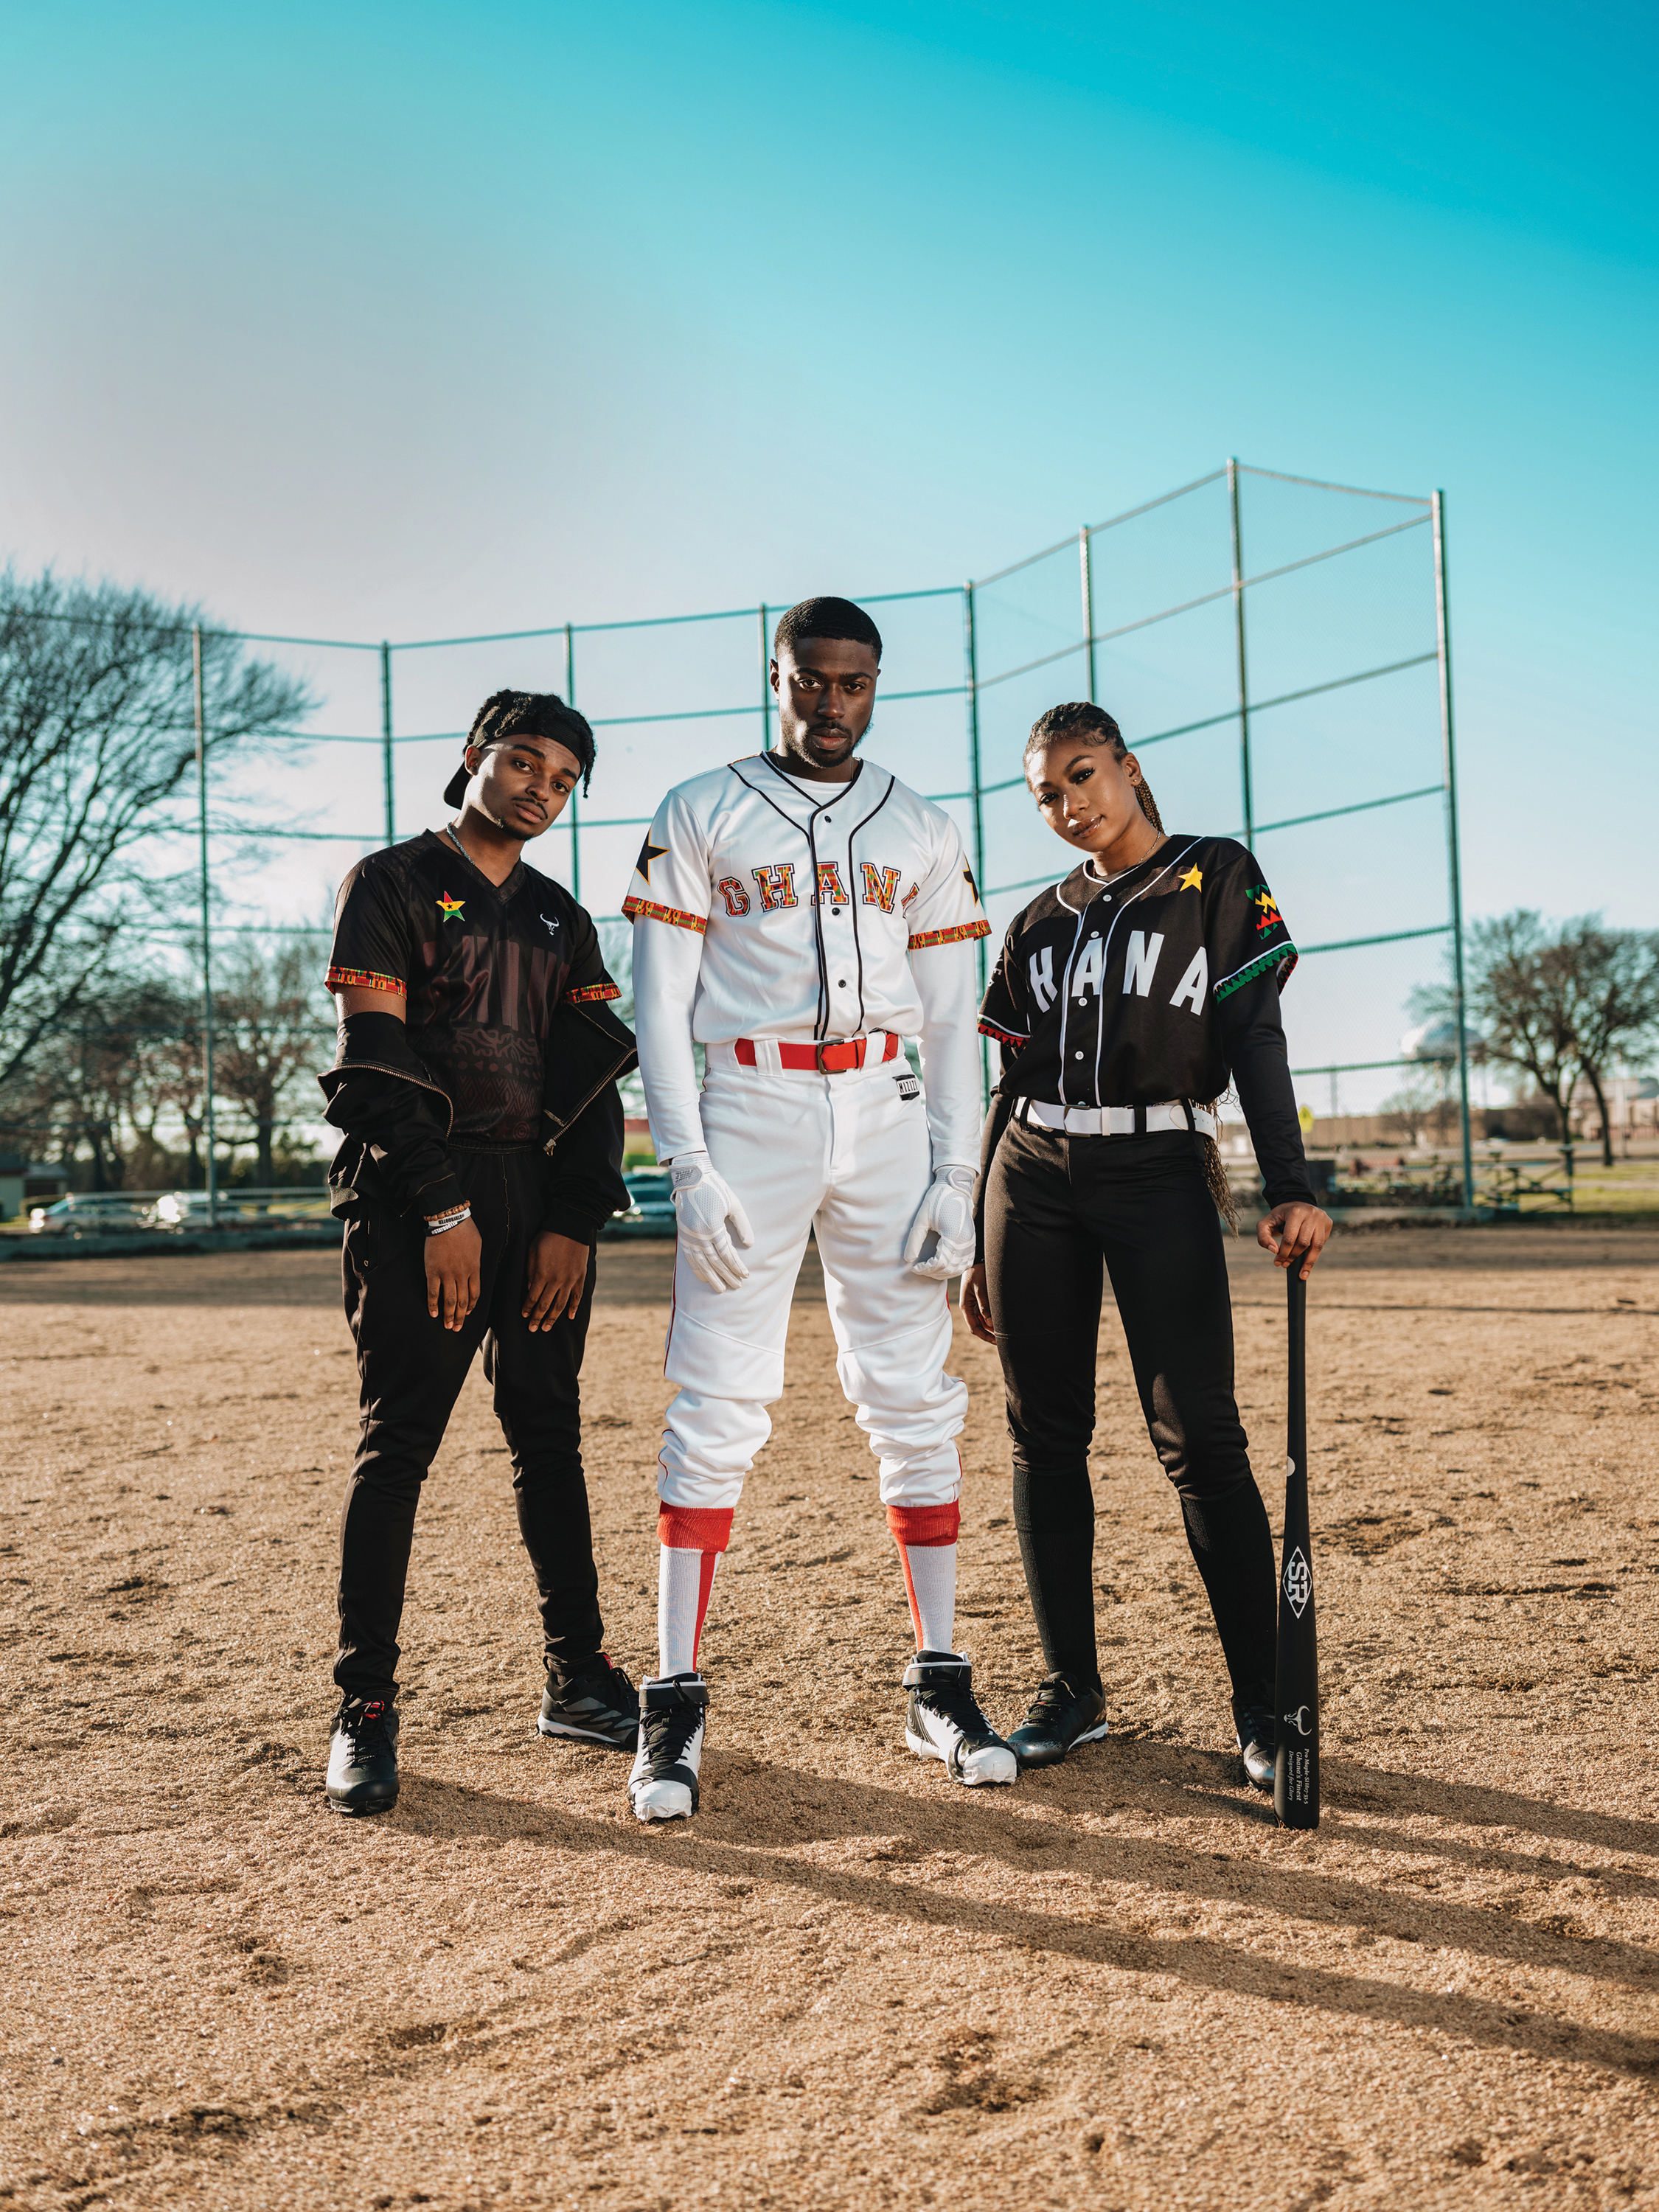 WAM's Iconic Jersey Exhibit Explores Baseball's Most Fashionable Garment  and its Design History – PRINT Magazine